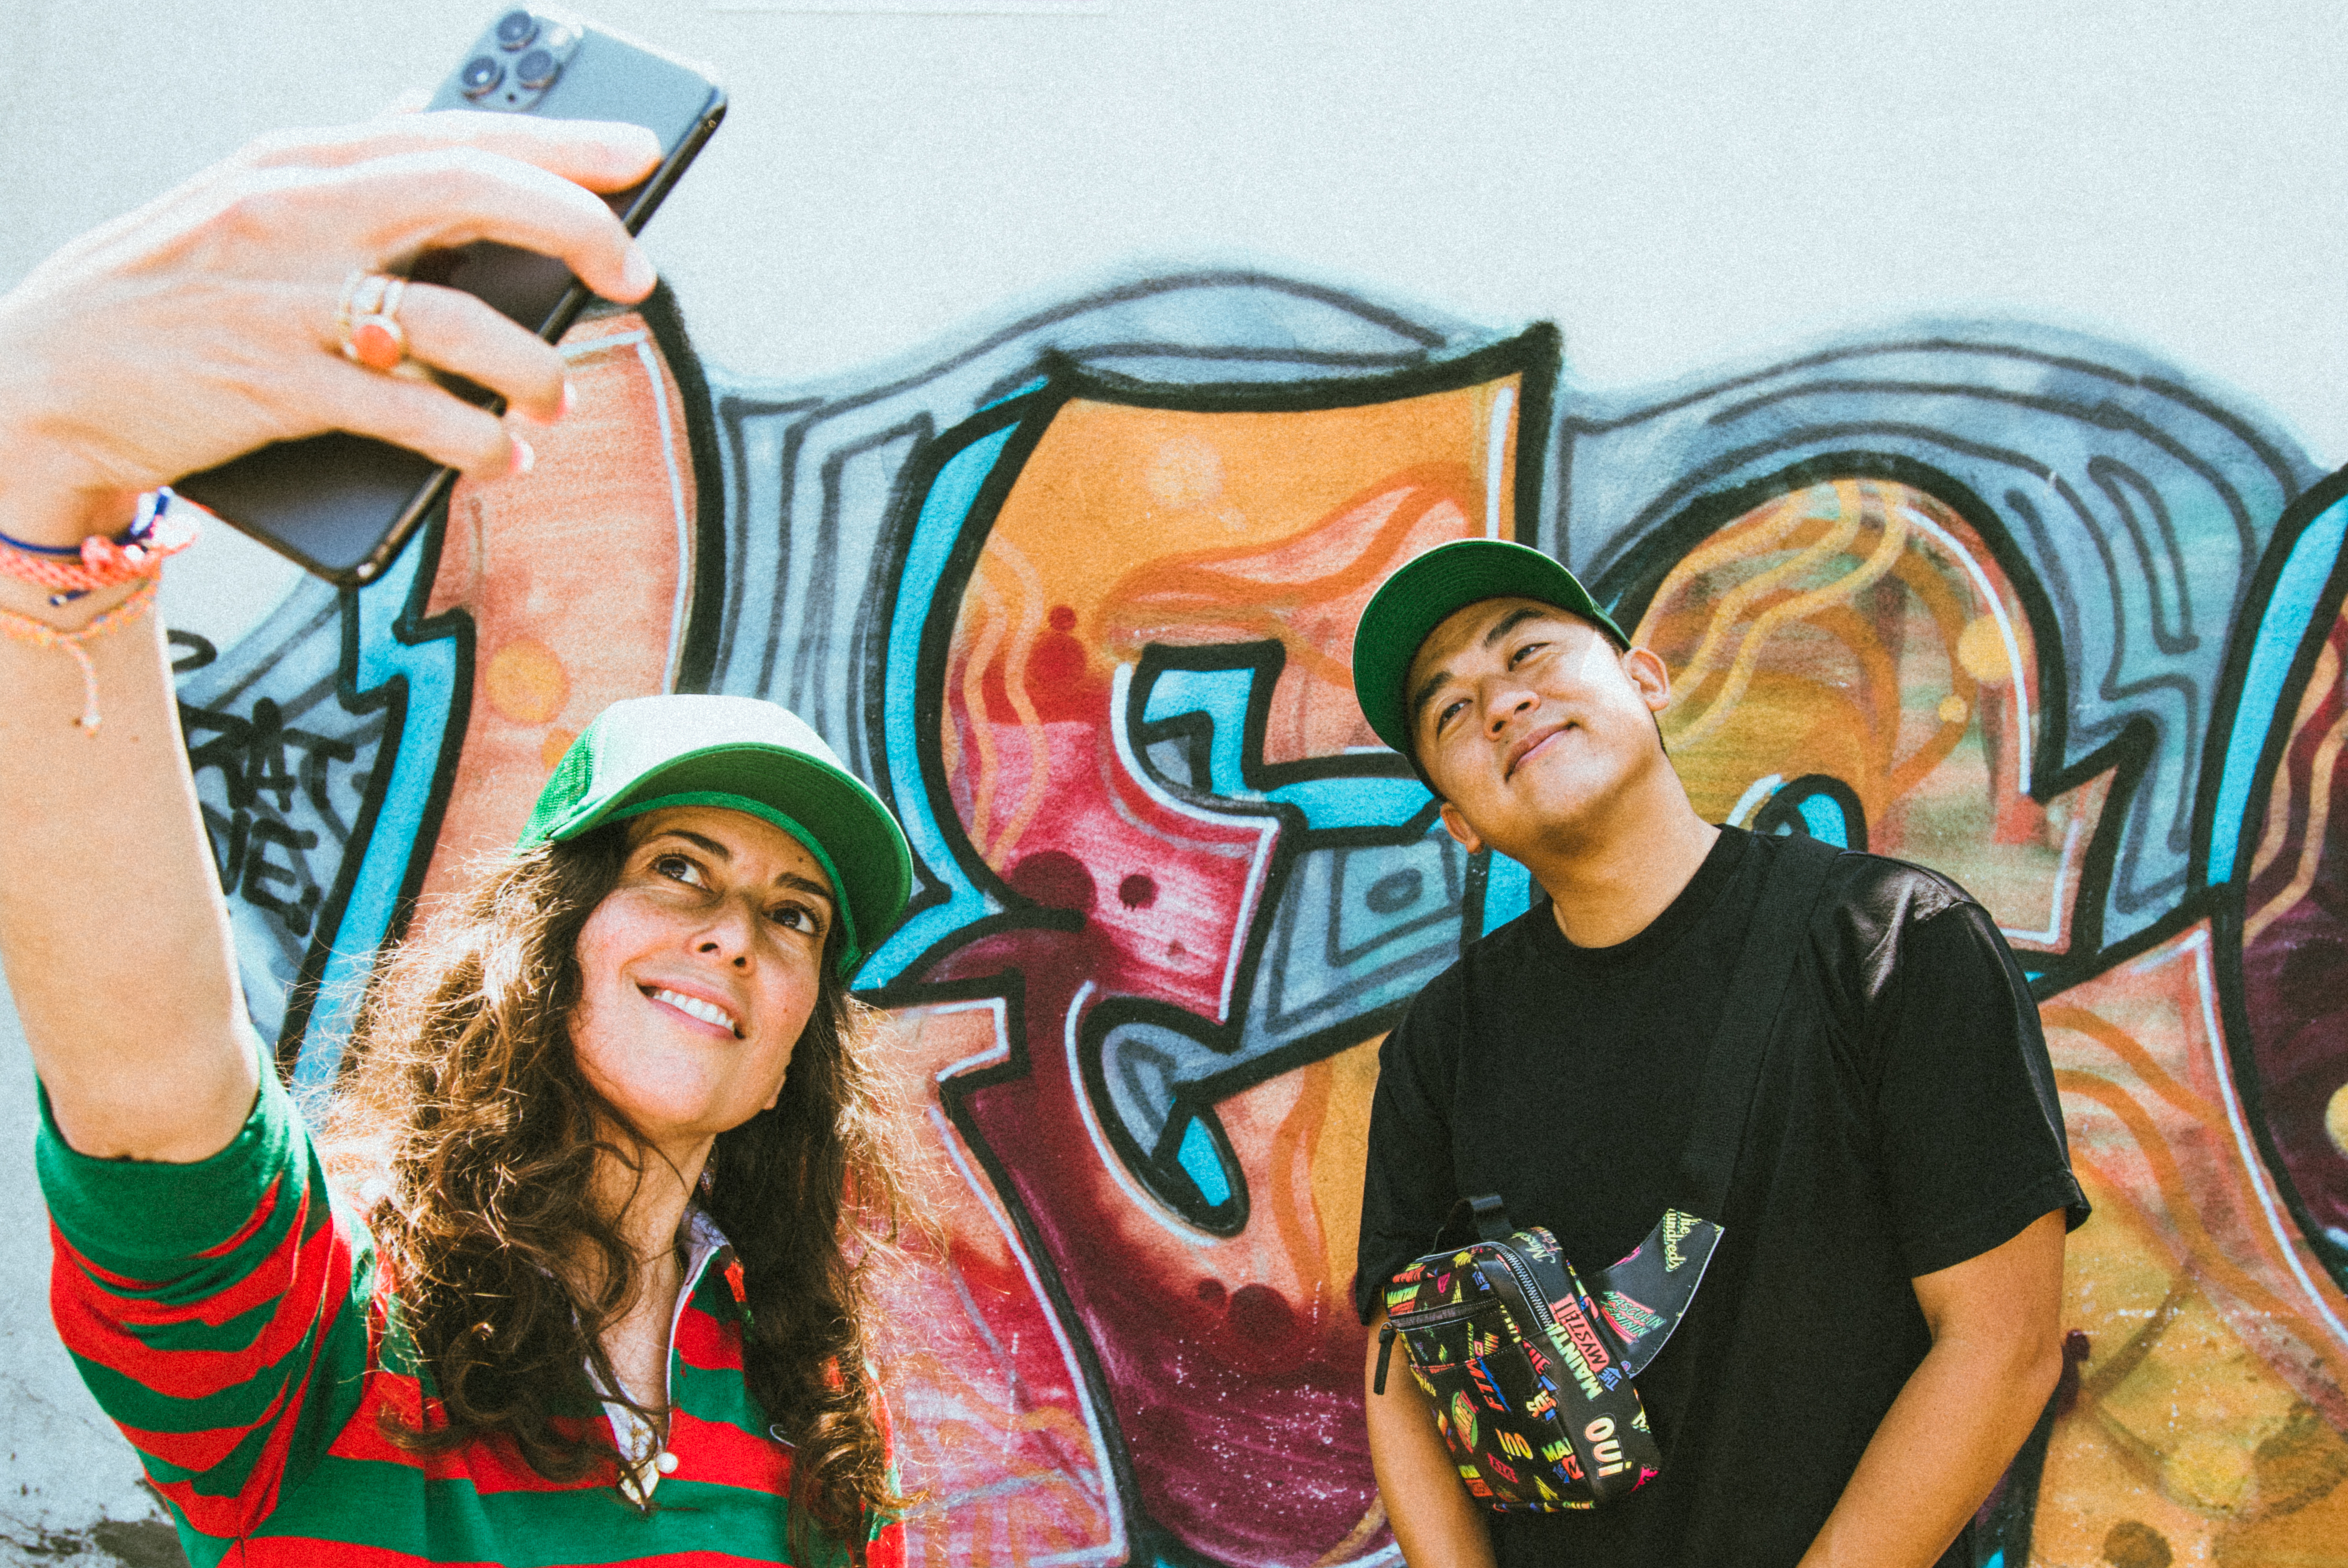 Clare Vivier and Bobby Kim of The Hundreds launch their first collaboration.